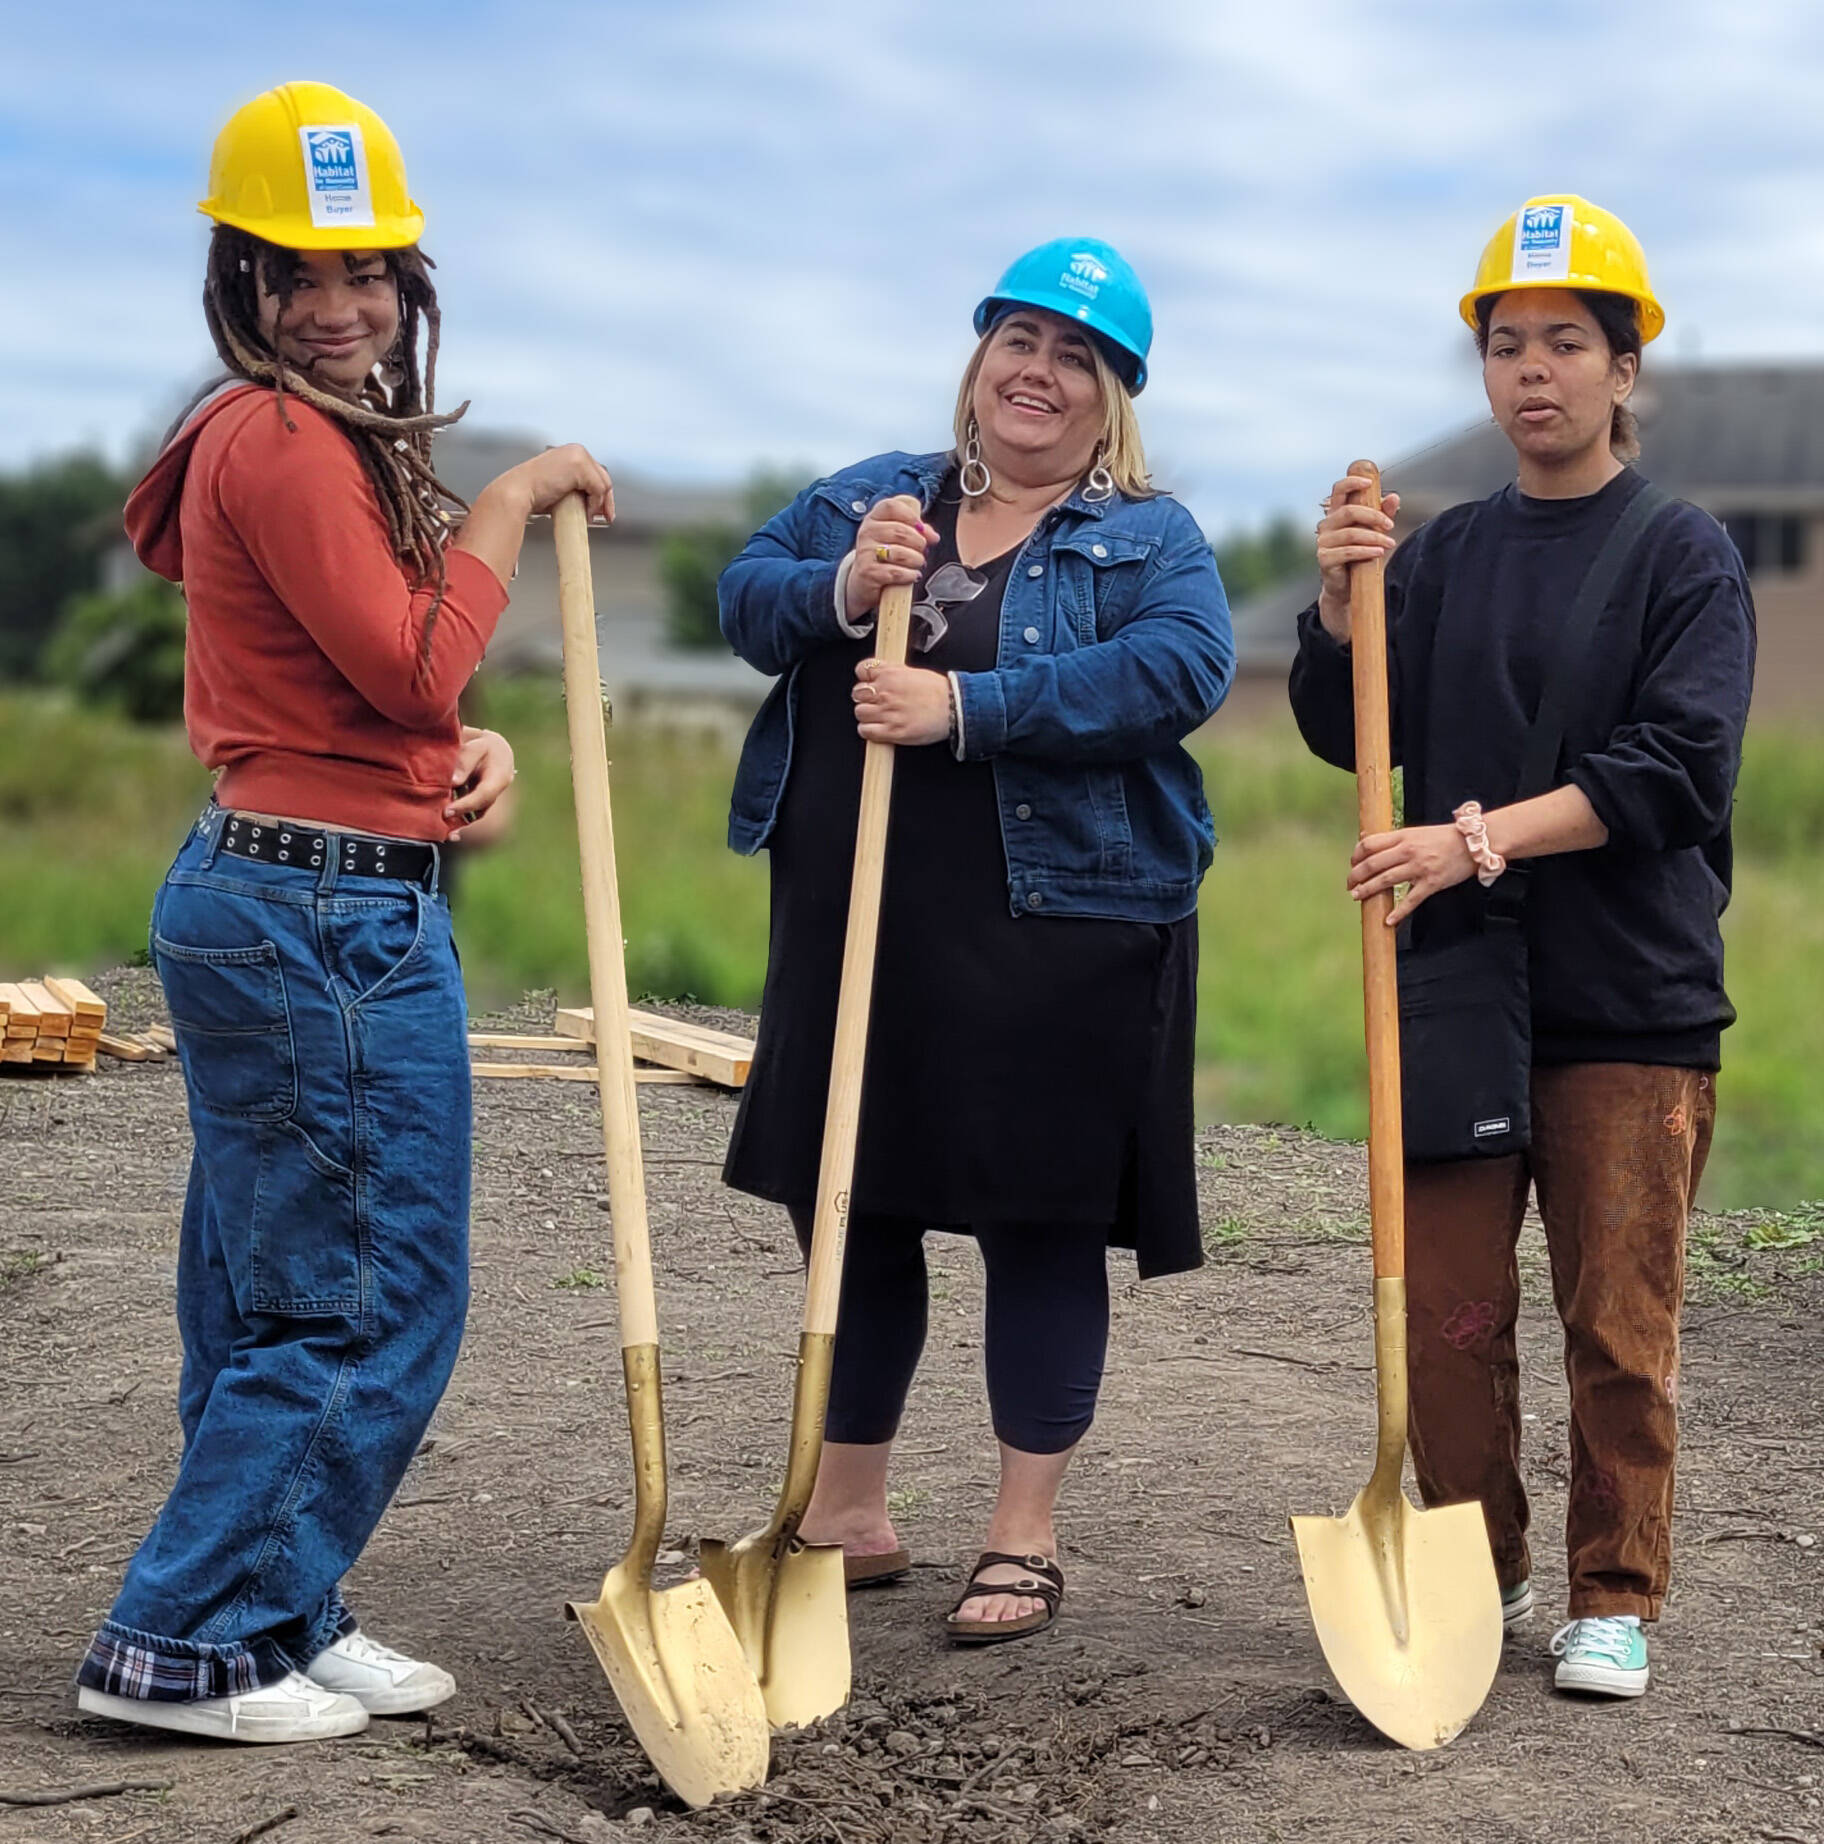 Habitat Homeowner Program participant Annie R., center, and her two daughters break ground at the site of their future home.